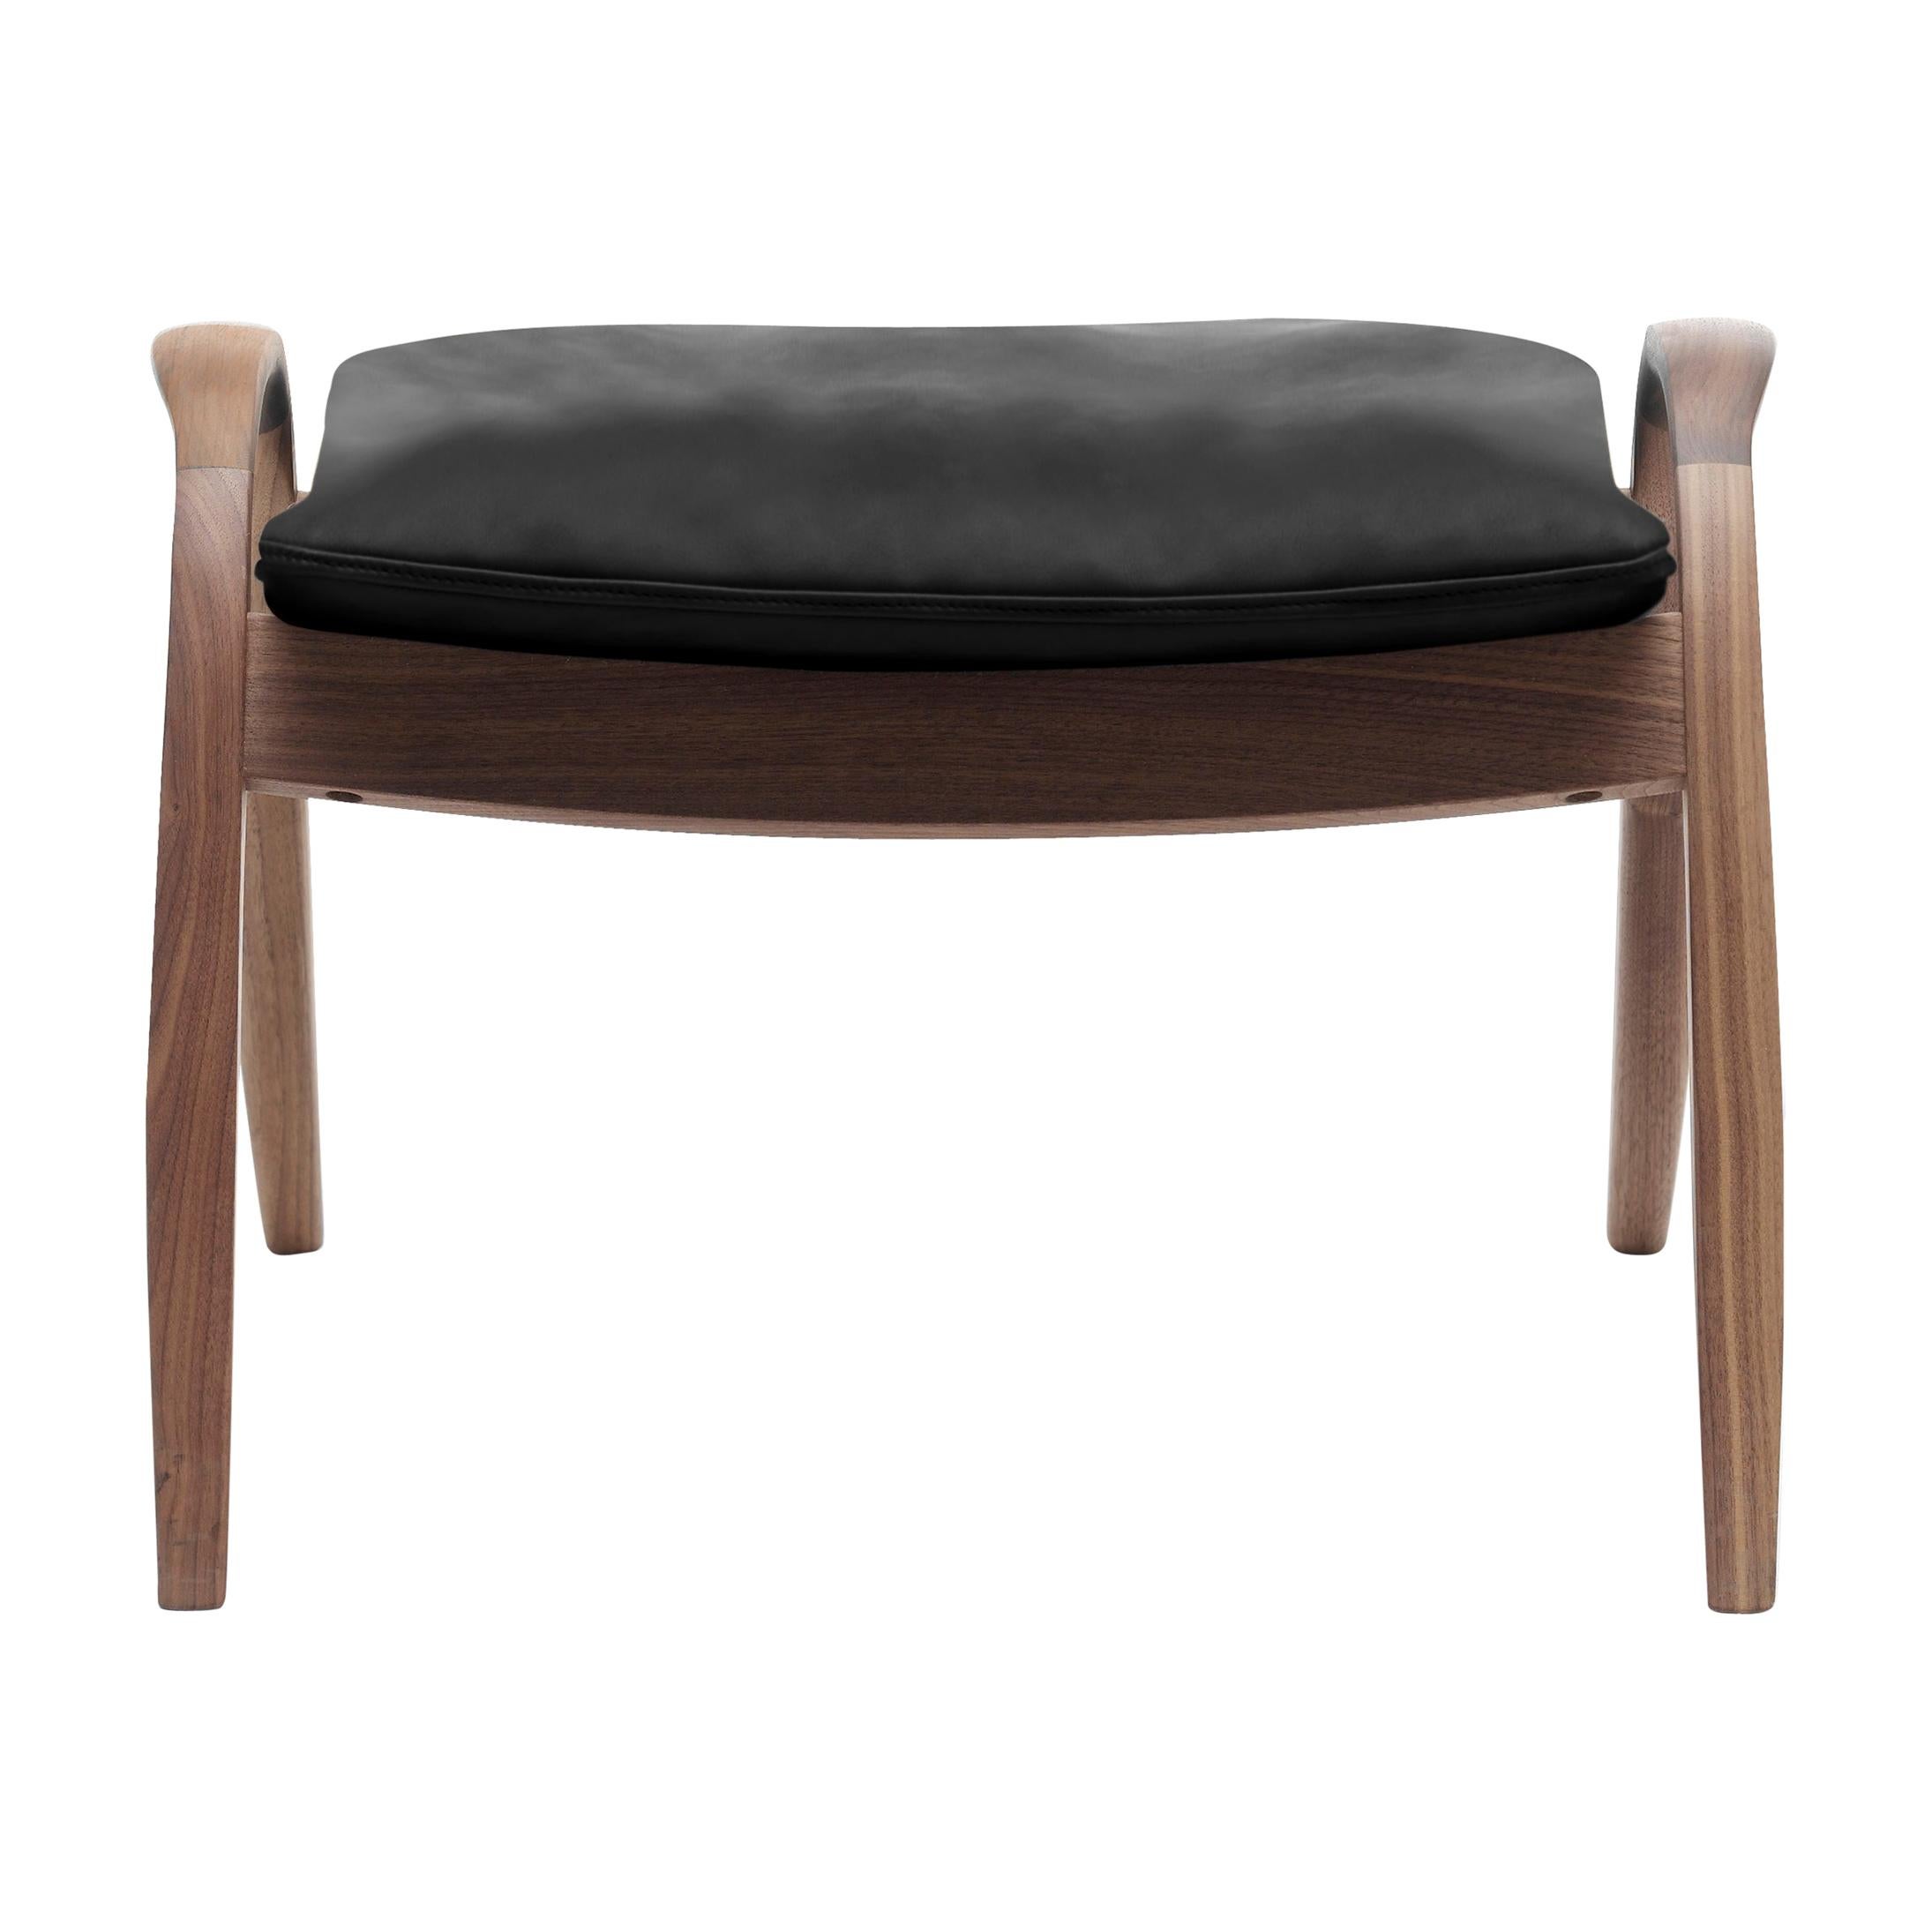 Black (Sif 98) FH430 Signature Footrest in Walnut Oil by Frits Henningsen